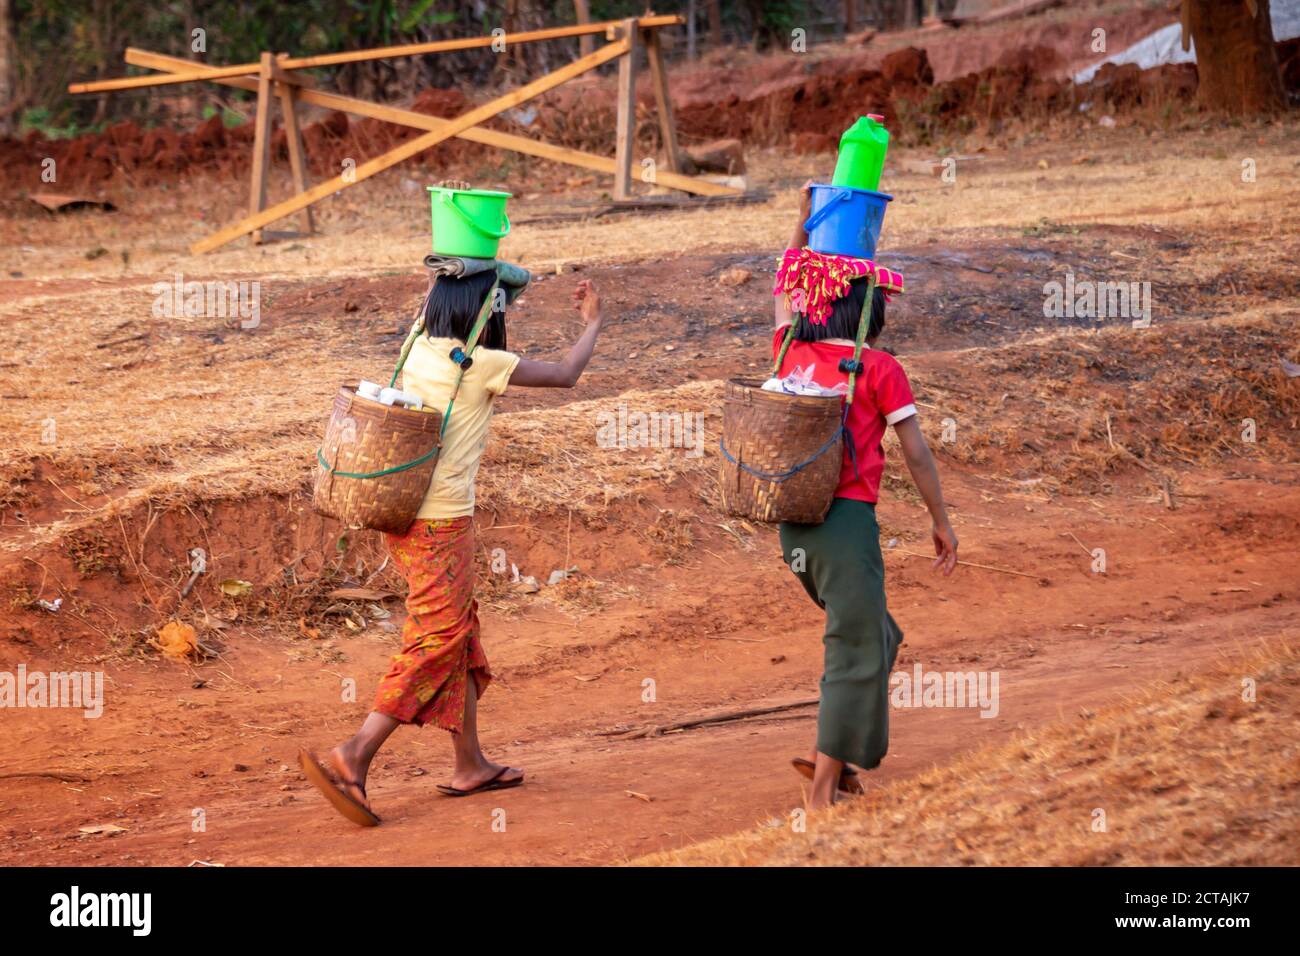 Two girls fetching water with plastic buckets and cans in Burma, Myanmar Stock Photo